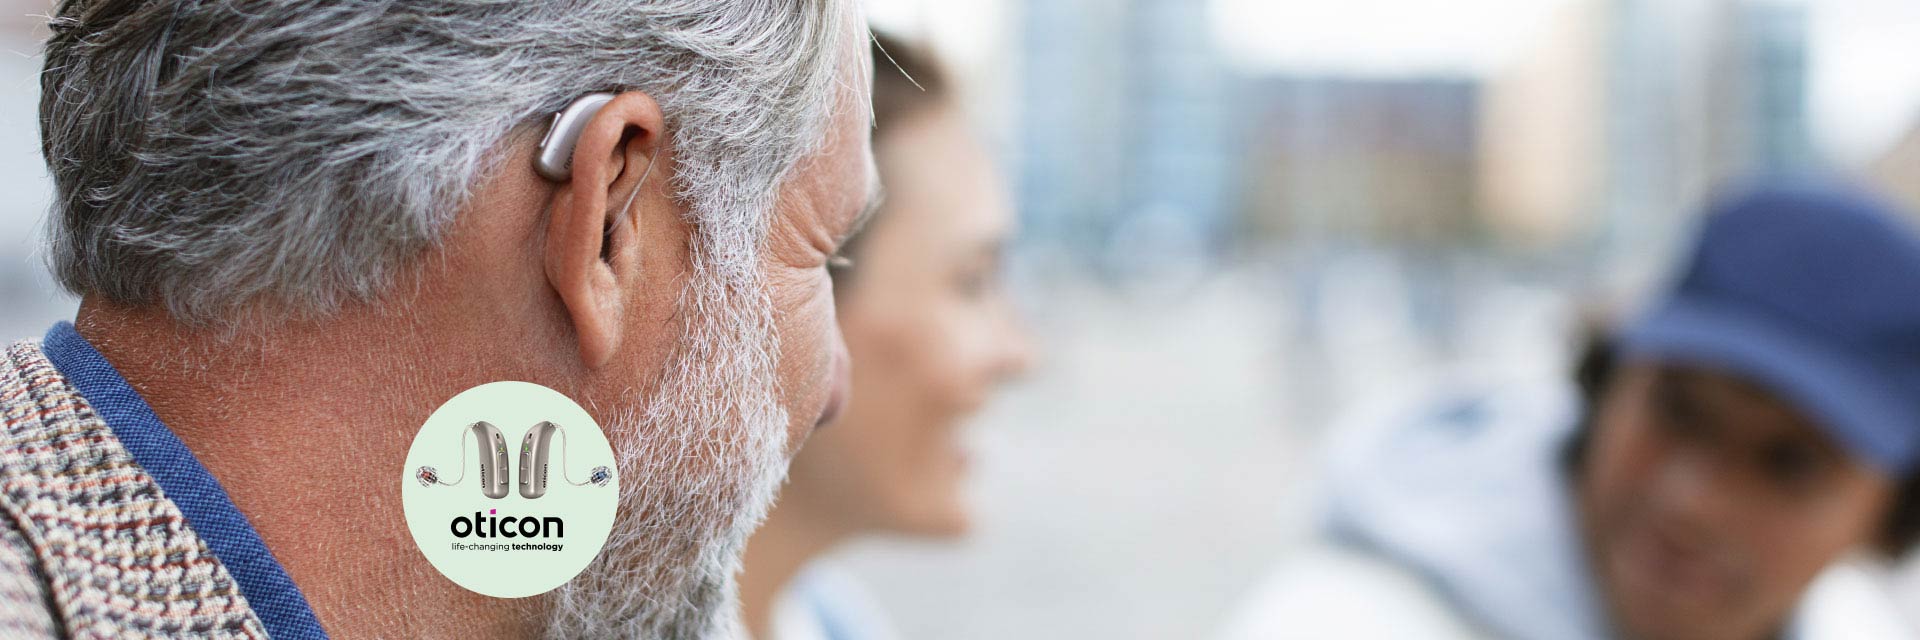 Image shows man with hearing aid behind his ear